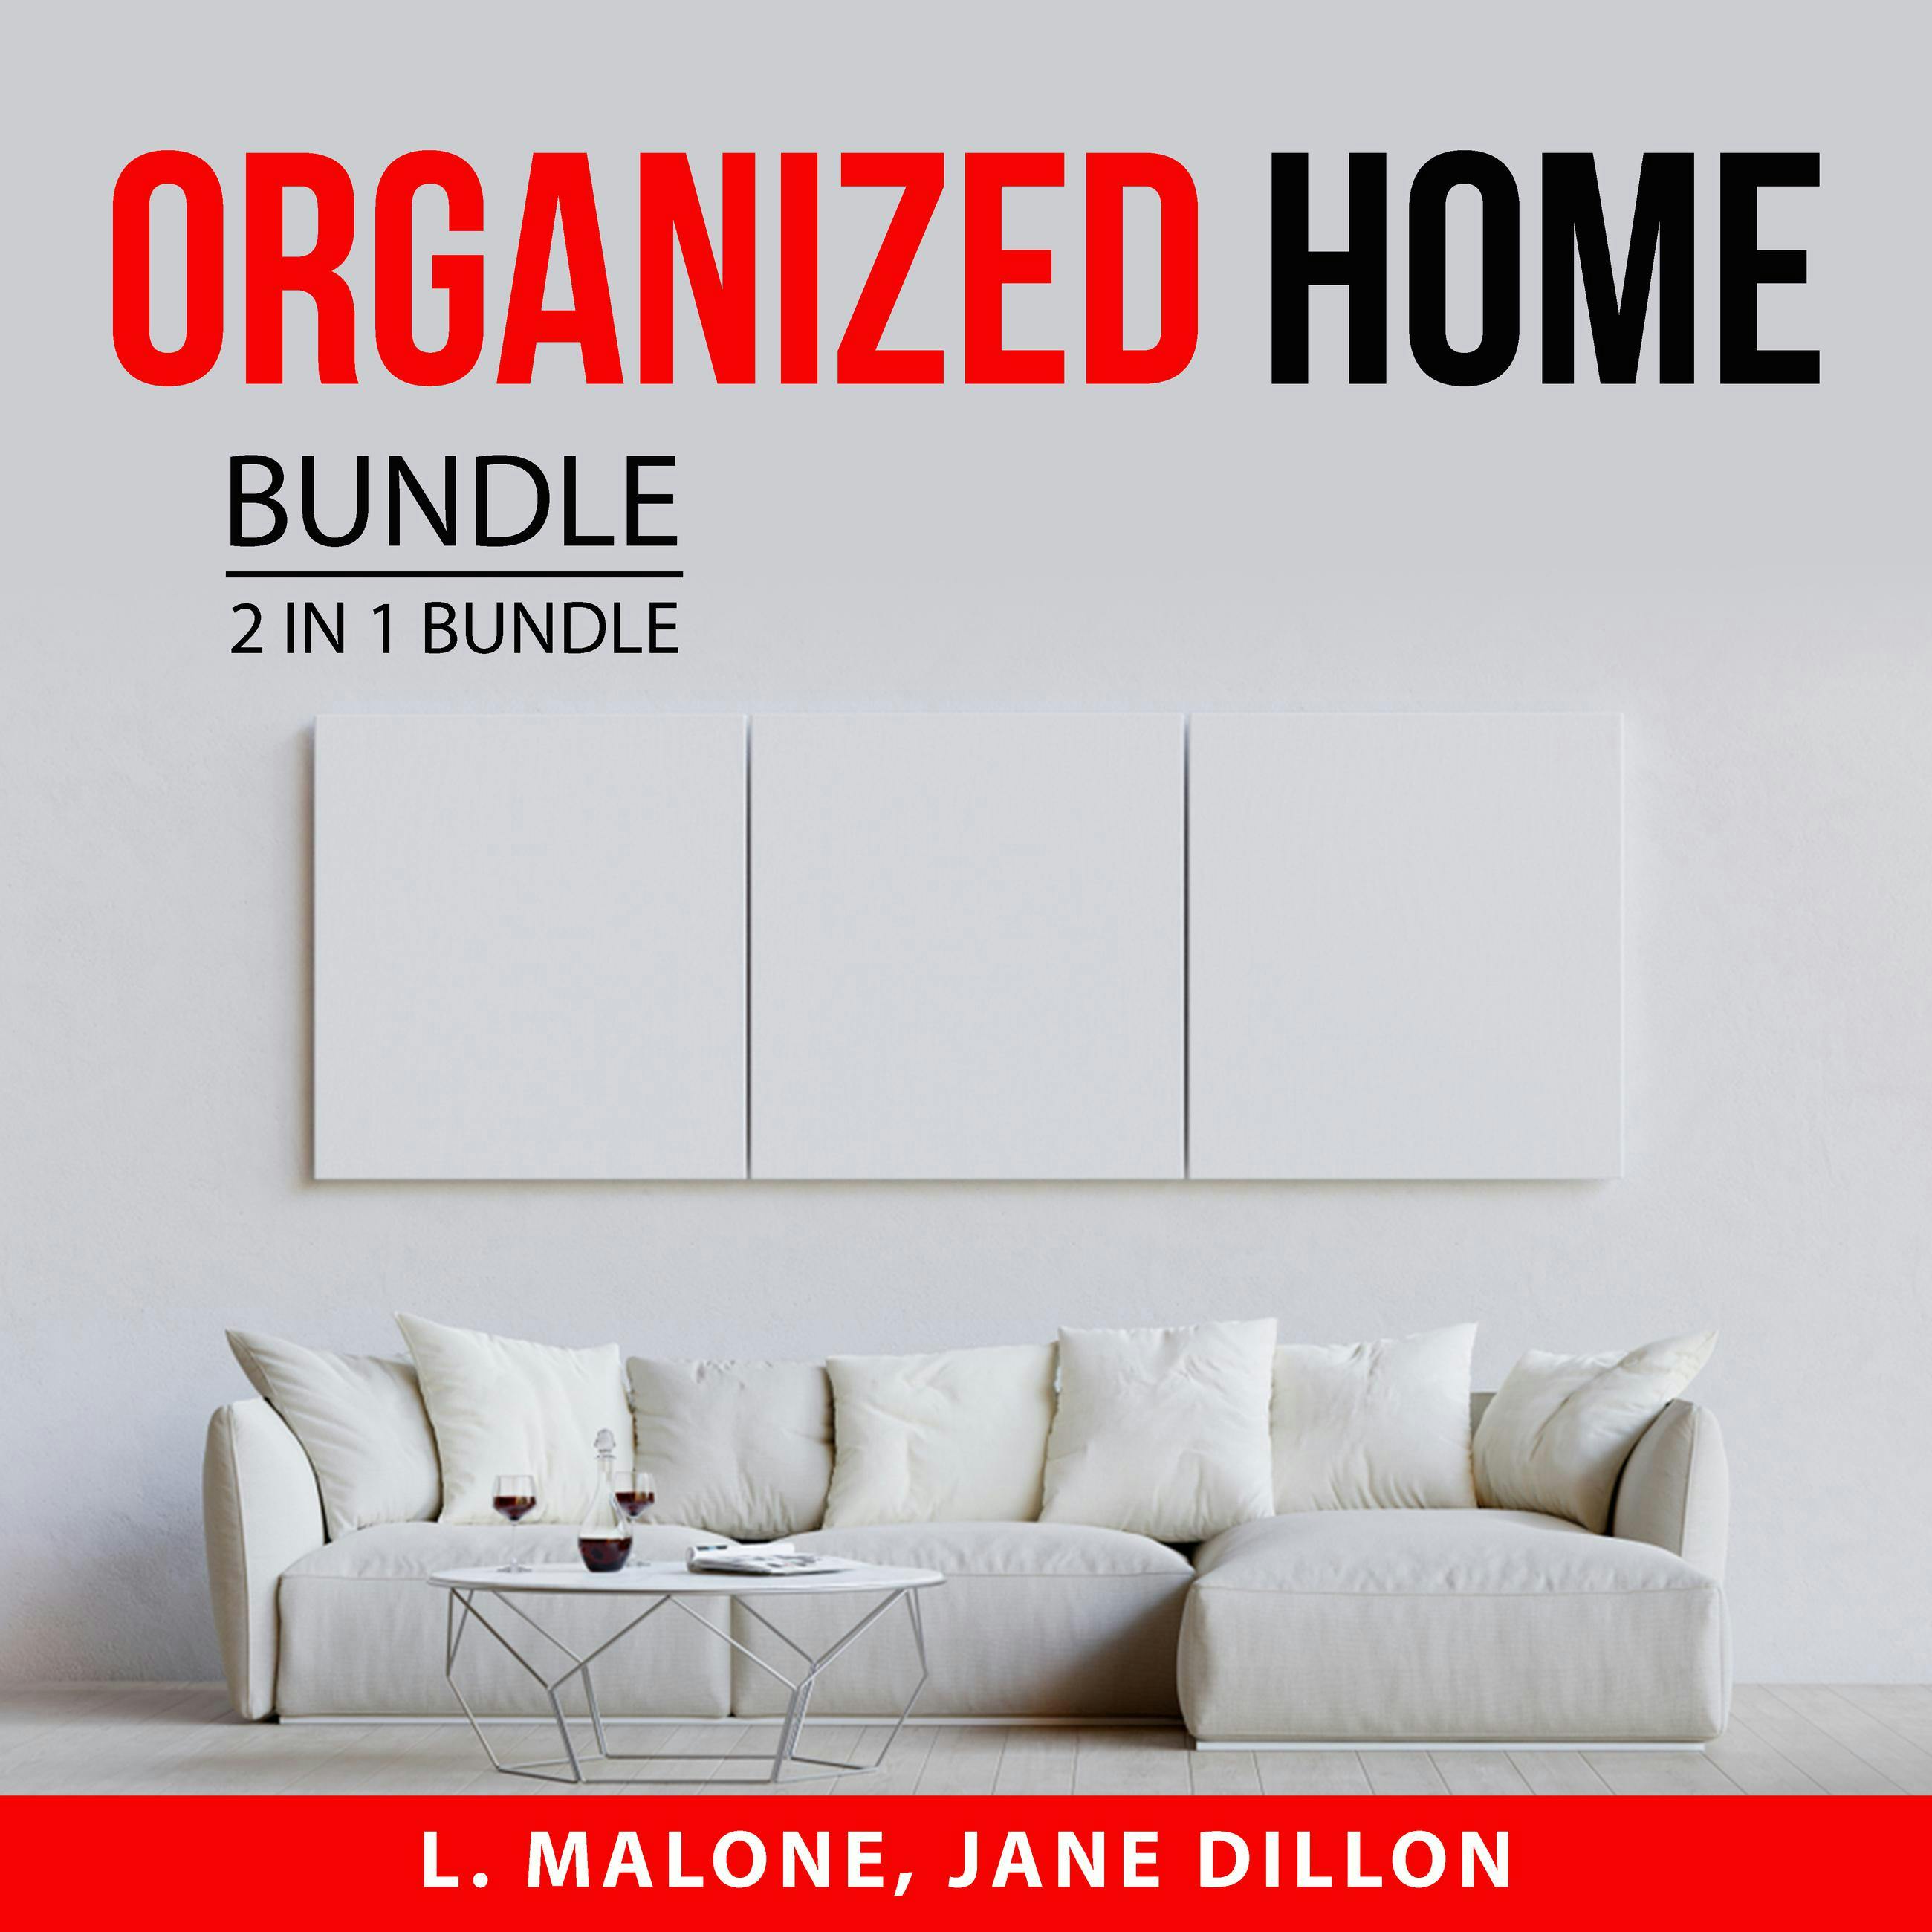 Organized Home Bundle, 2 in 1 Bundle: Secrets to a Clean and Organized Home, and Declutter and Organize Your Home - undefined